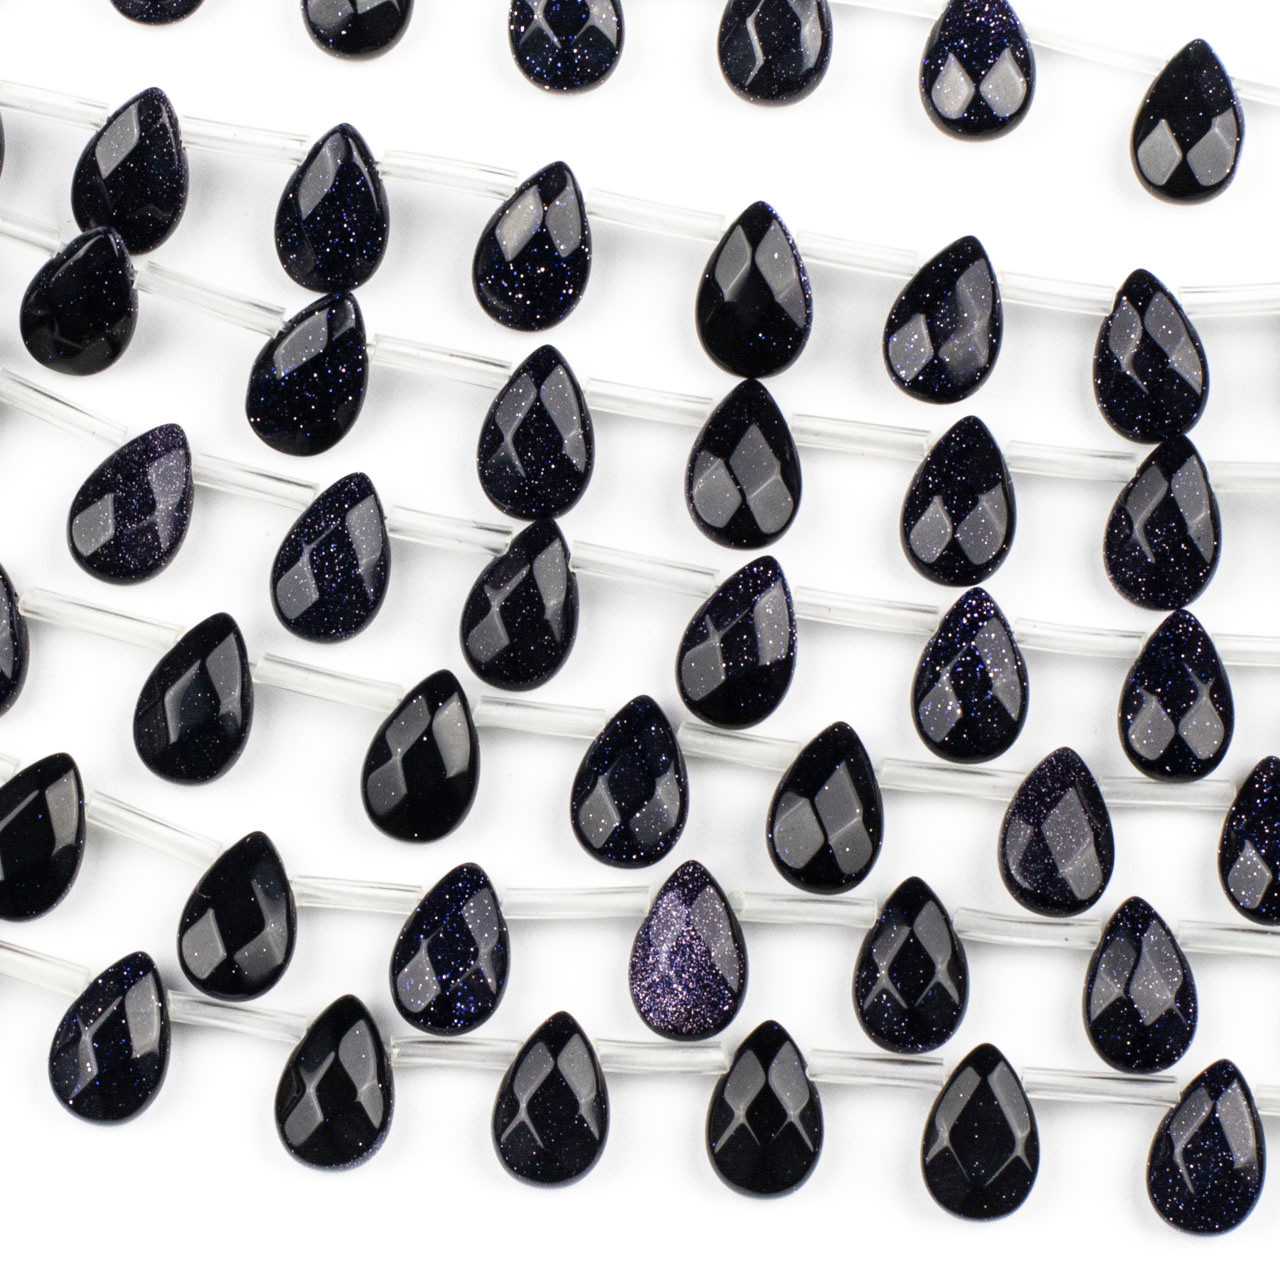 Faceted Clear Quartz Teardrop Beads, Stone Beads - Dearbeads